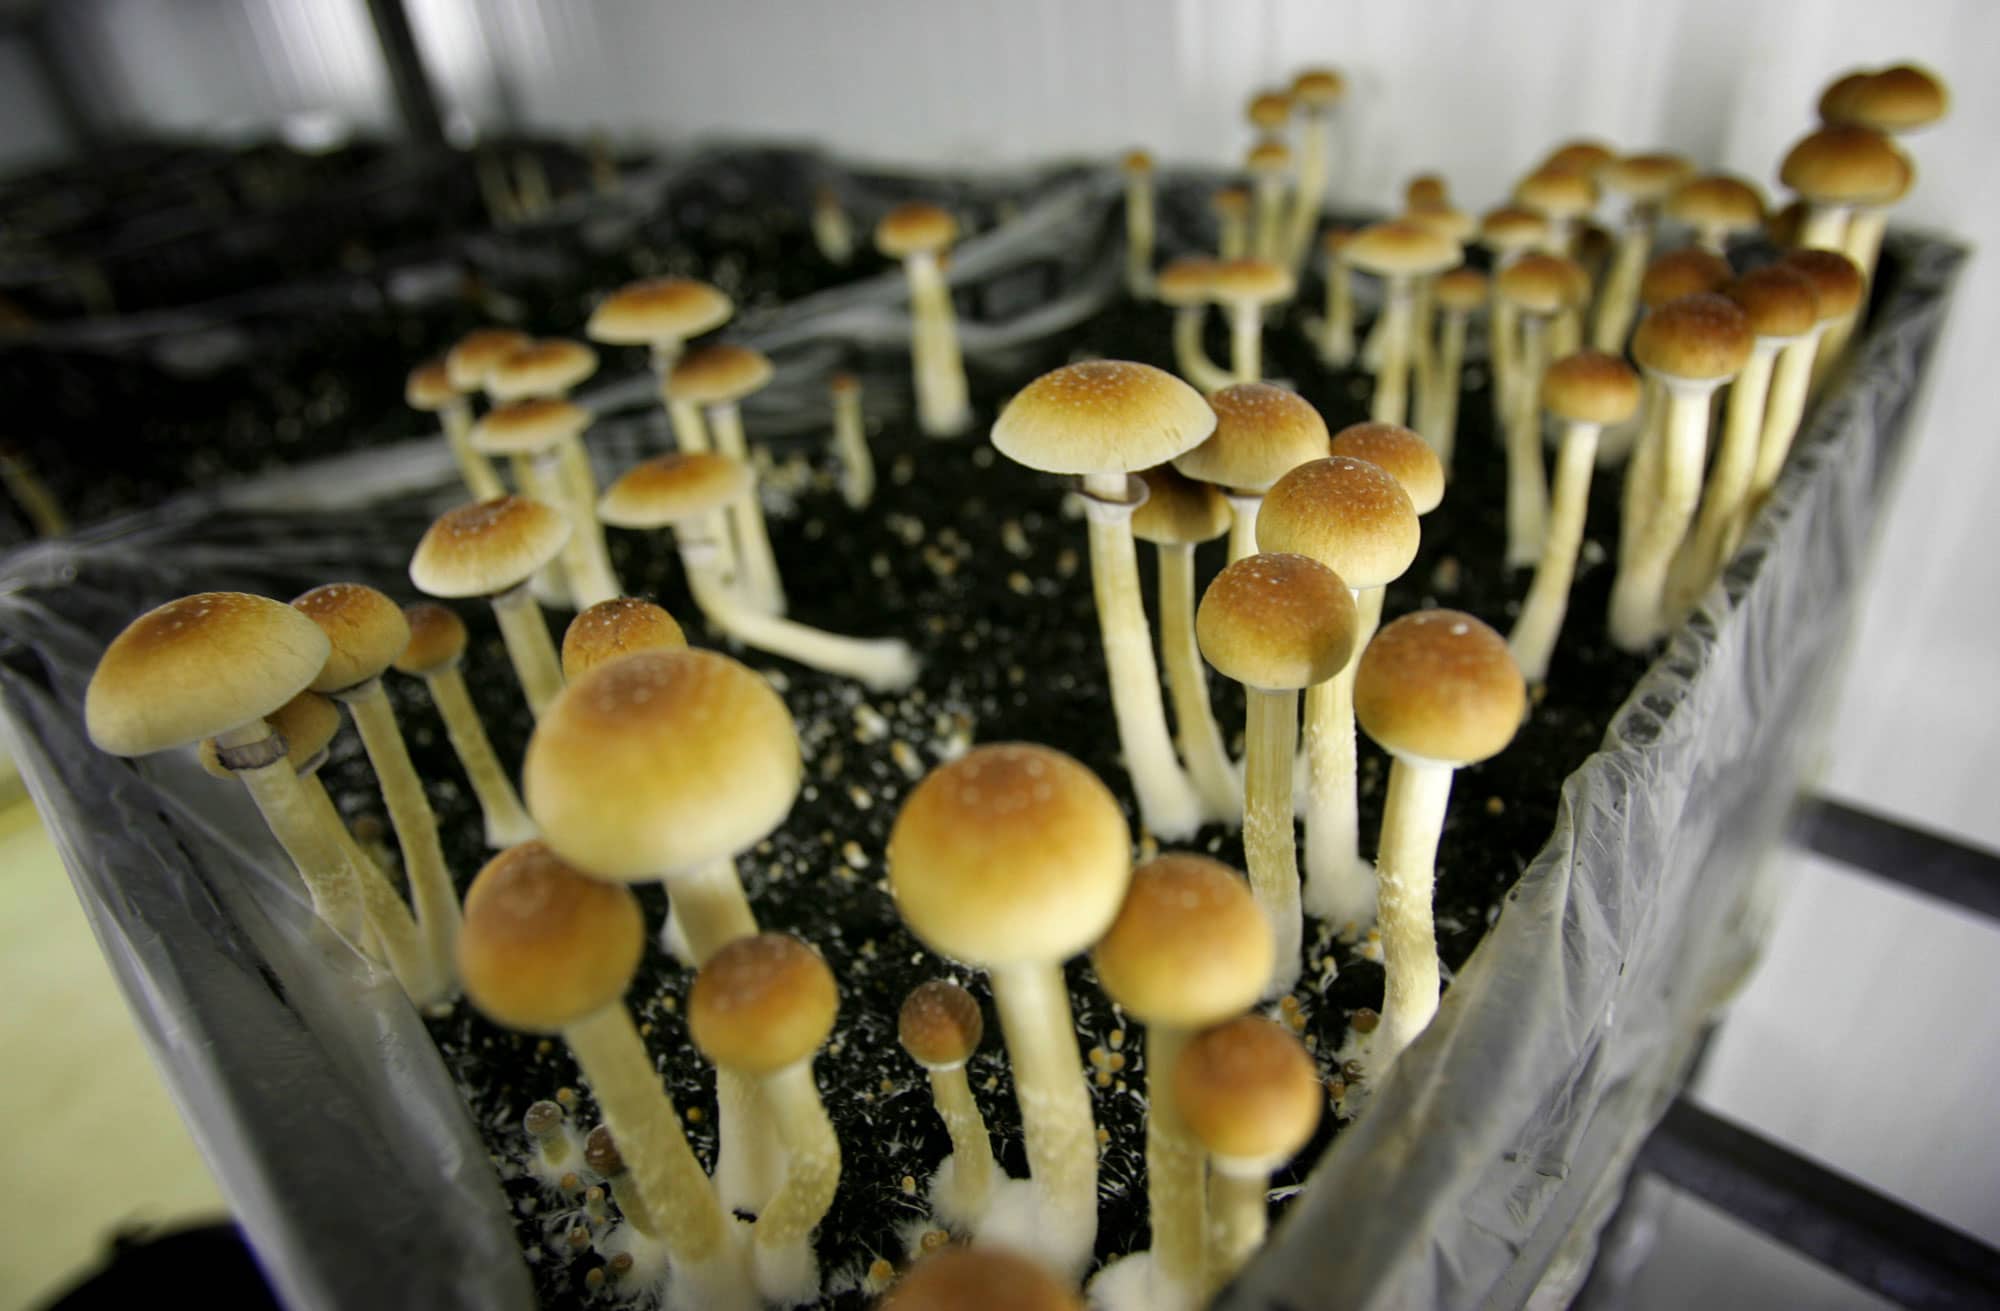 Psychedelic drug growth in psychological well being remedy nears actuality